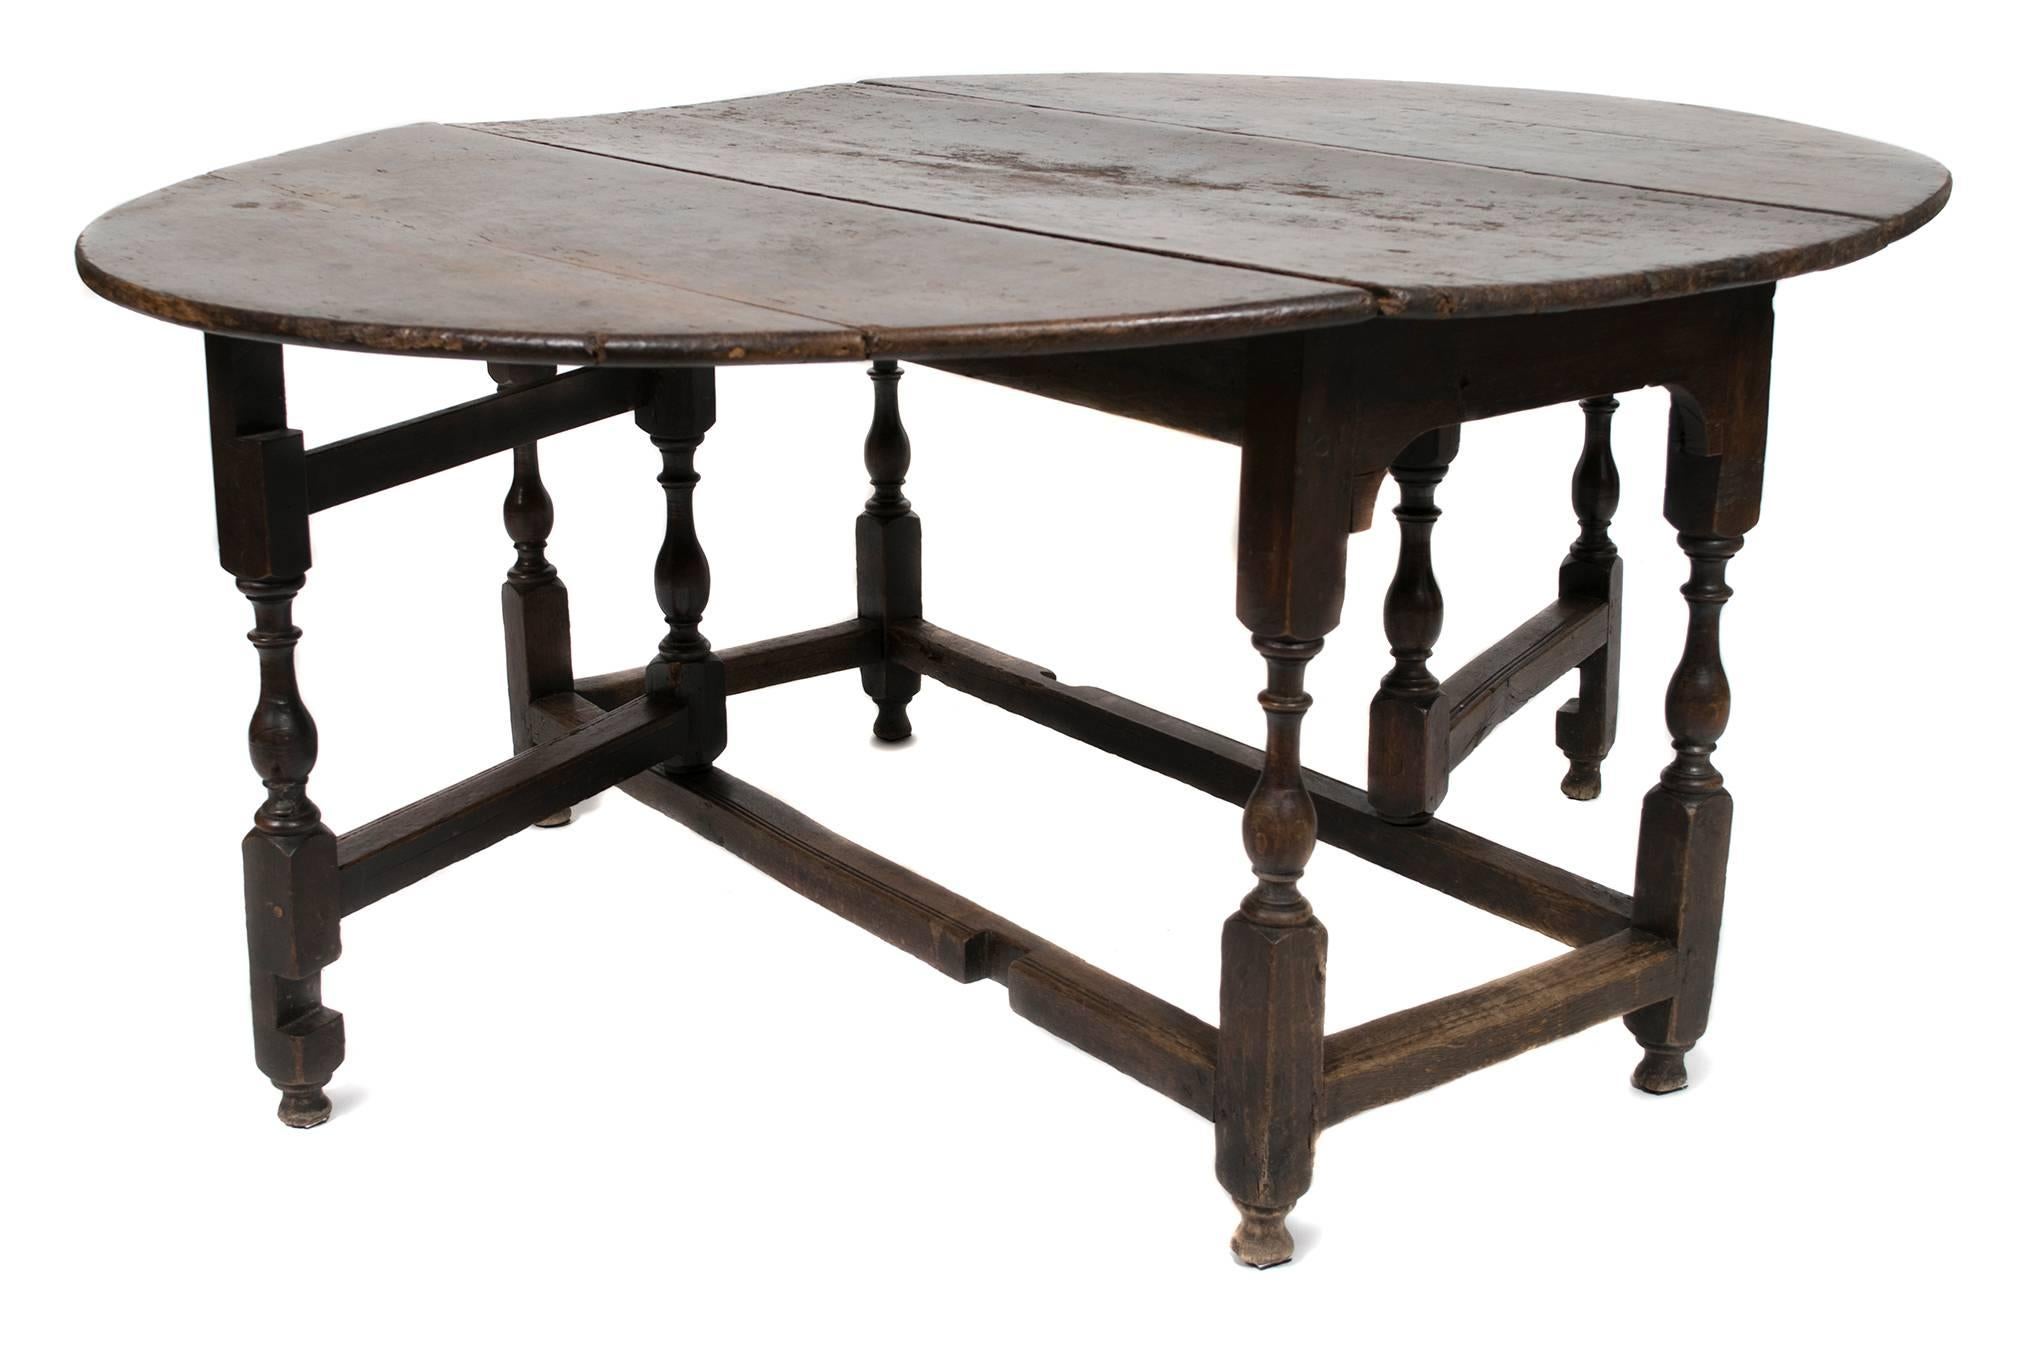 Early Georgian Drop-Leaf Oak Table with Turned Legs, circa 1750 In Good Condition For Sale In Chicago, IL